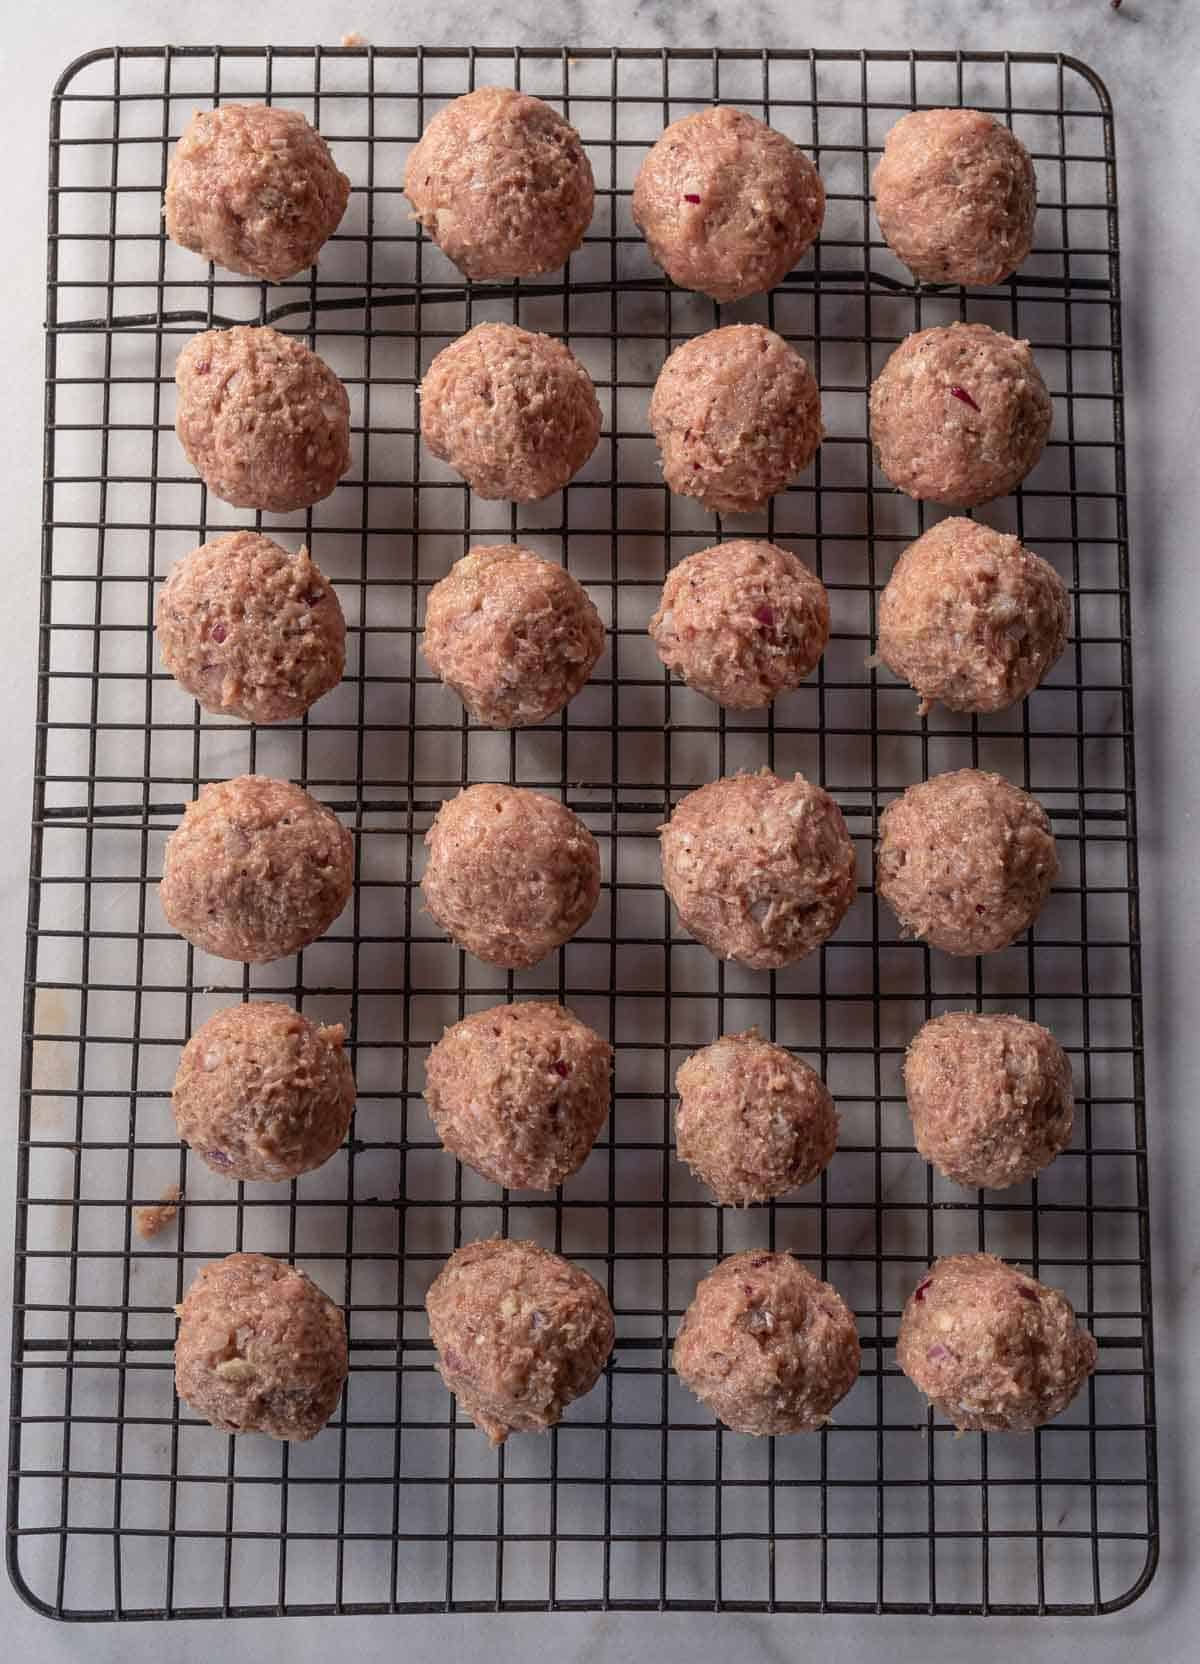 Turkey meatballs formed into golf ball sized rounds on a cookie drying rack before going on the smoker.